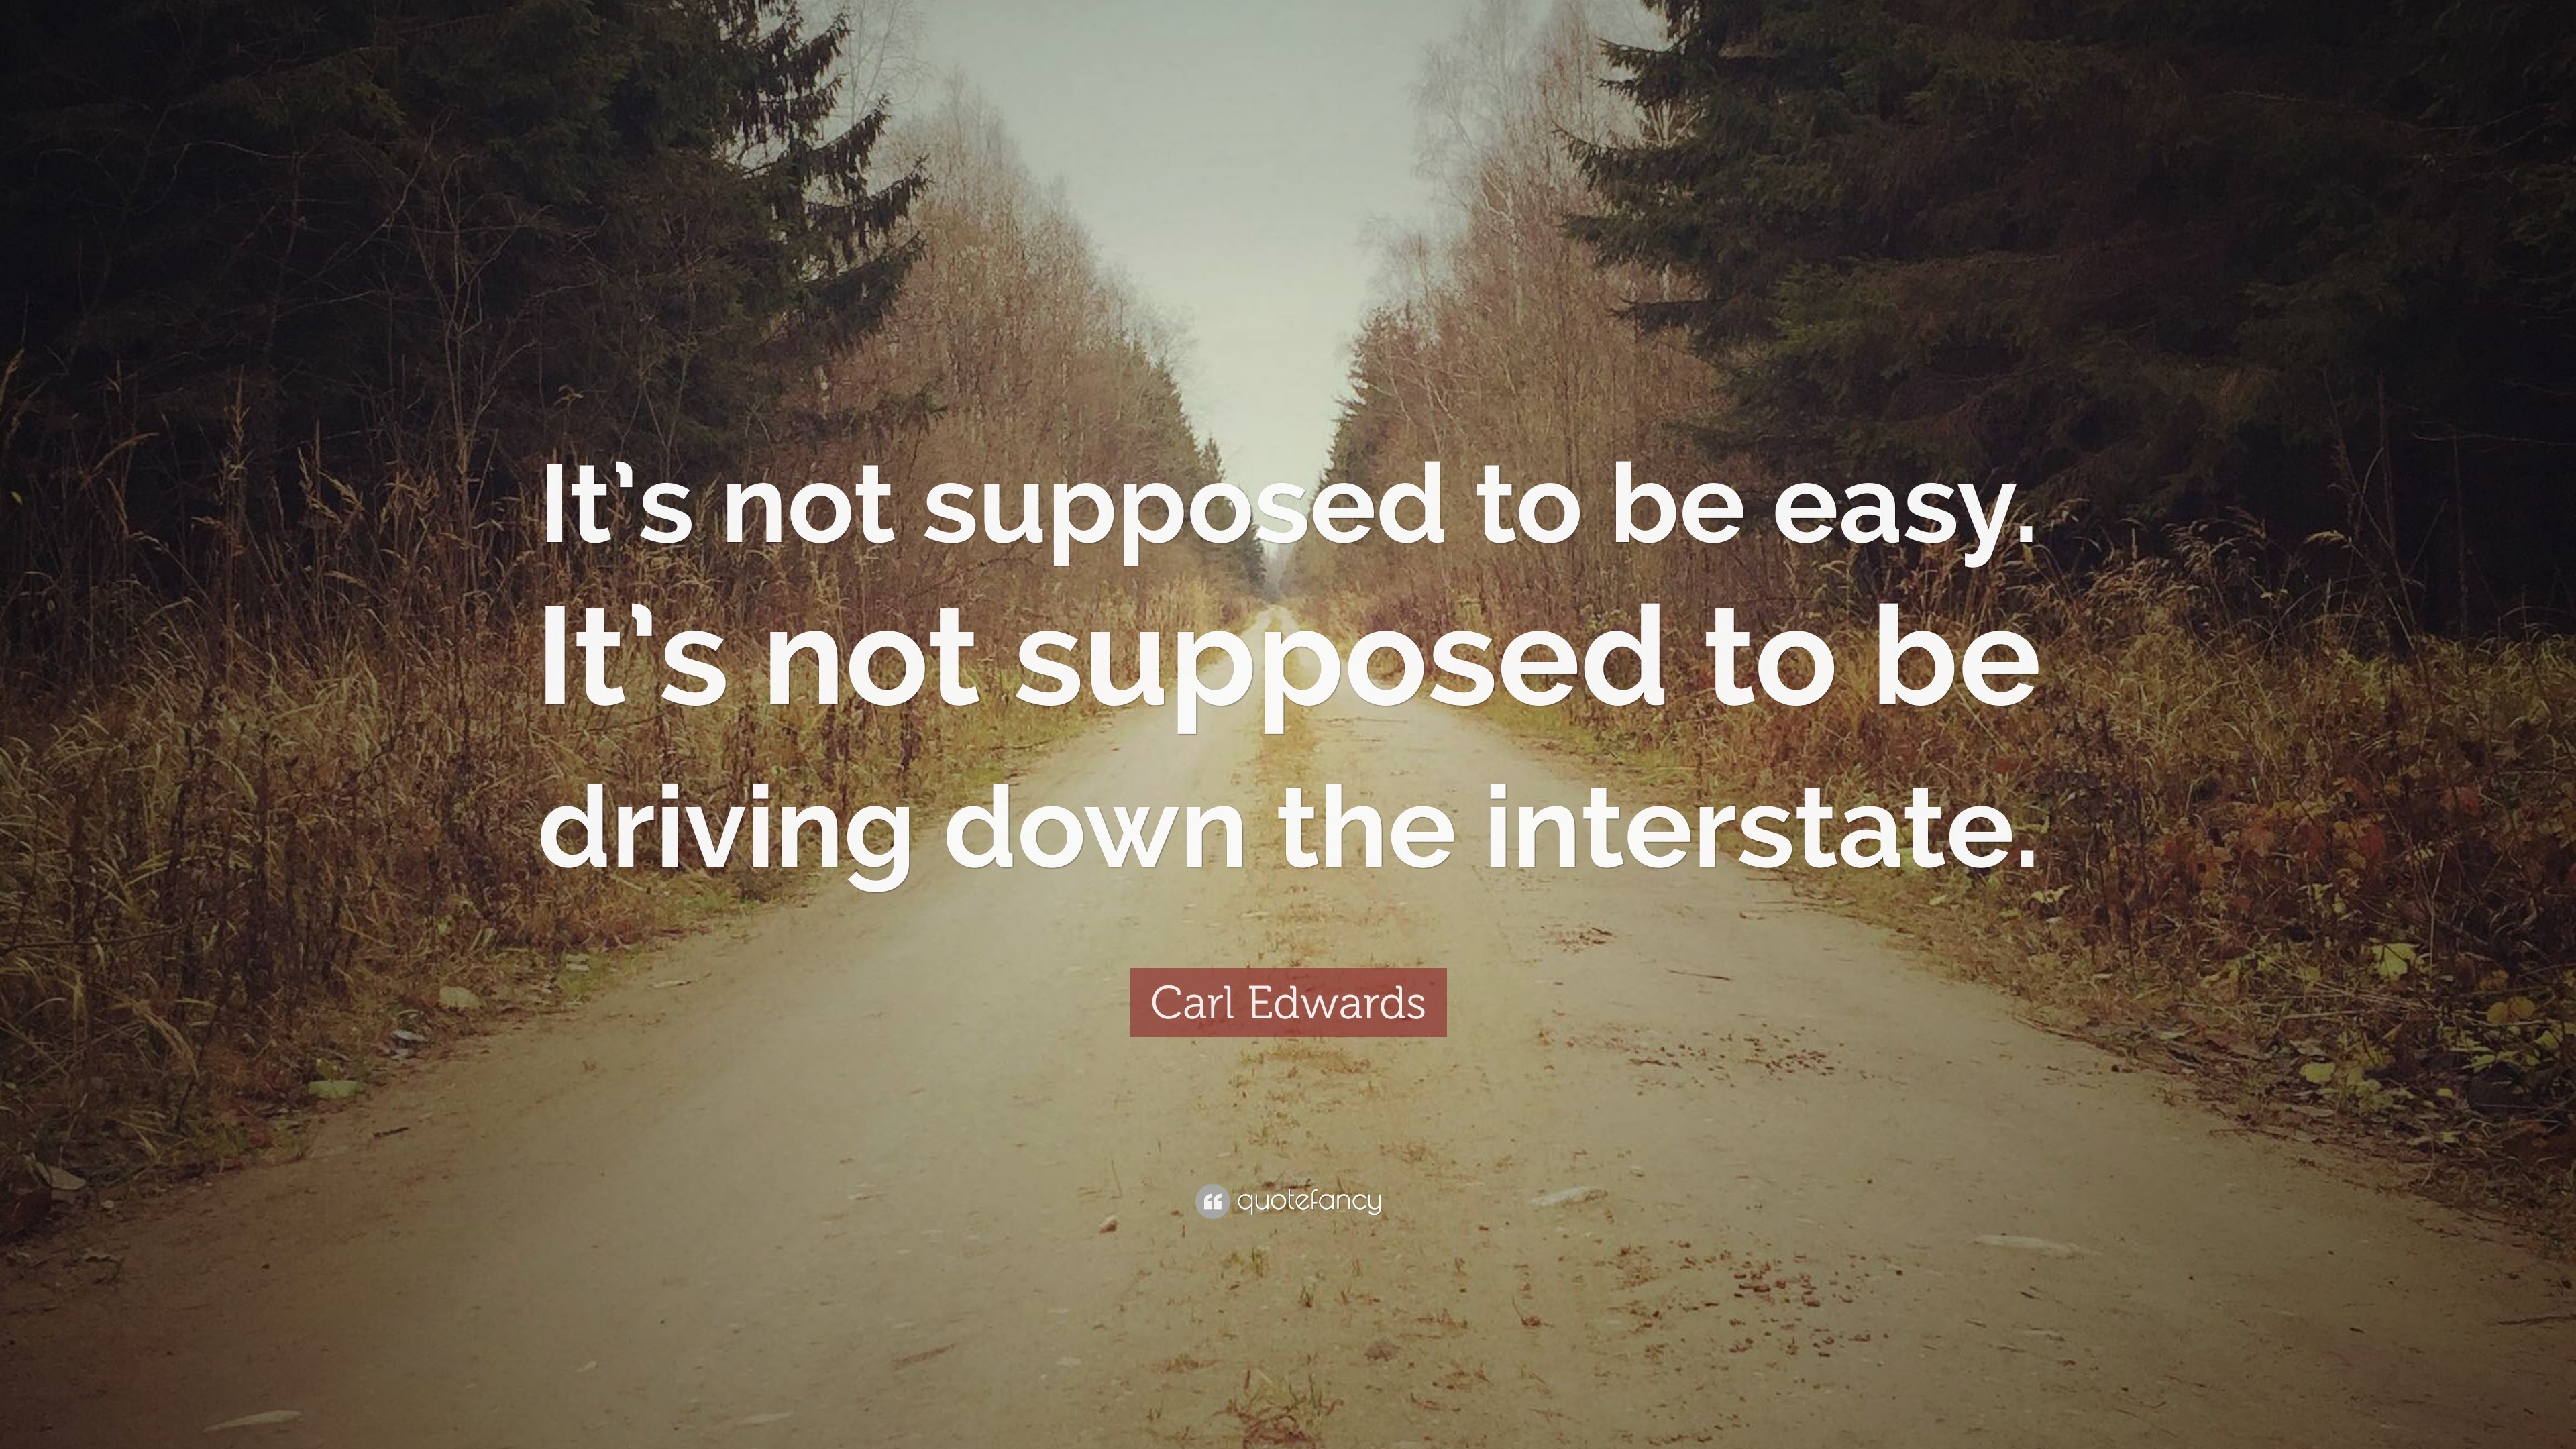 3840x2160 Carl Edwards Quote: “It's not supposed to be easy. It's not supposed to